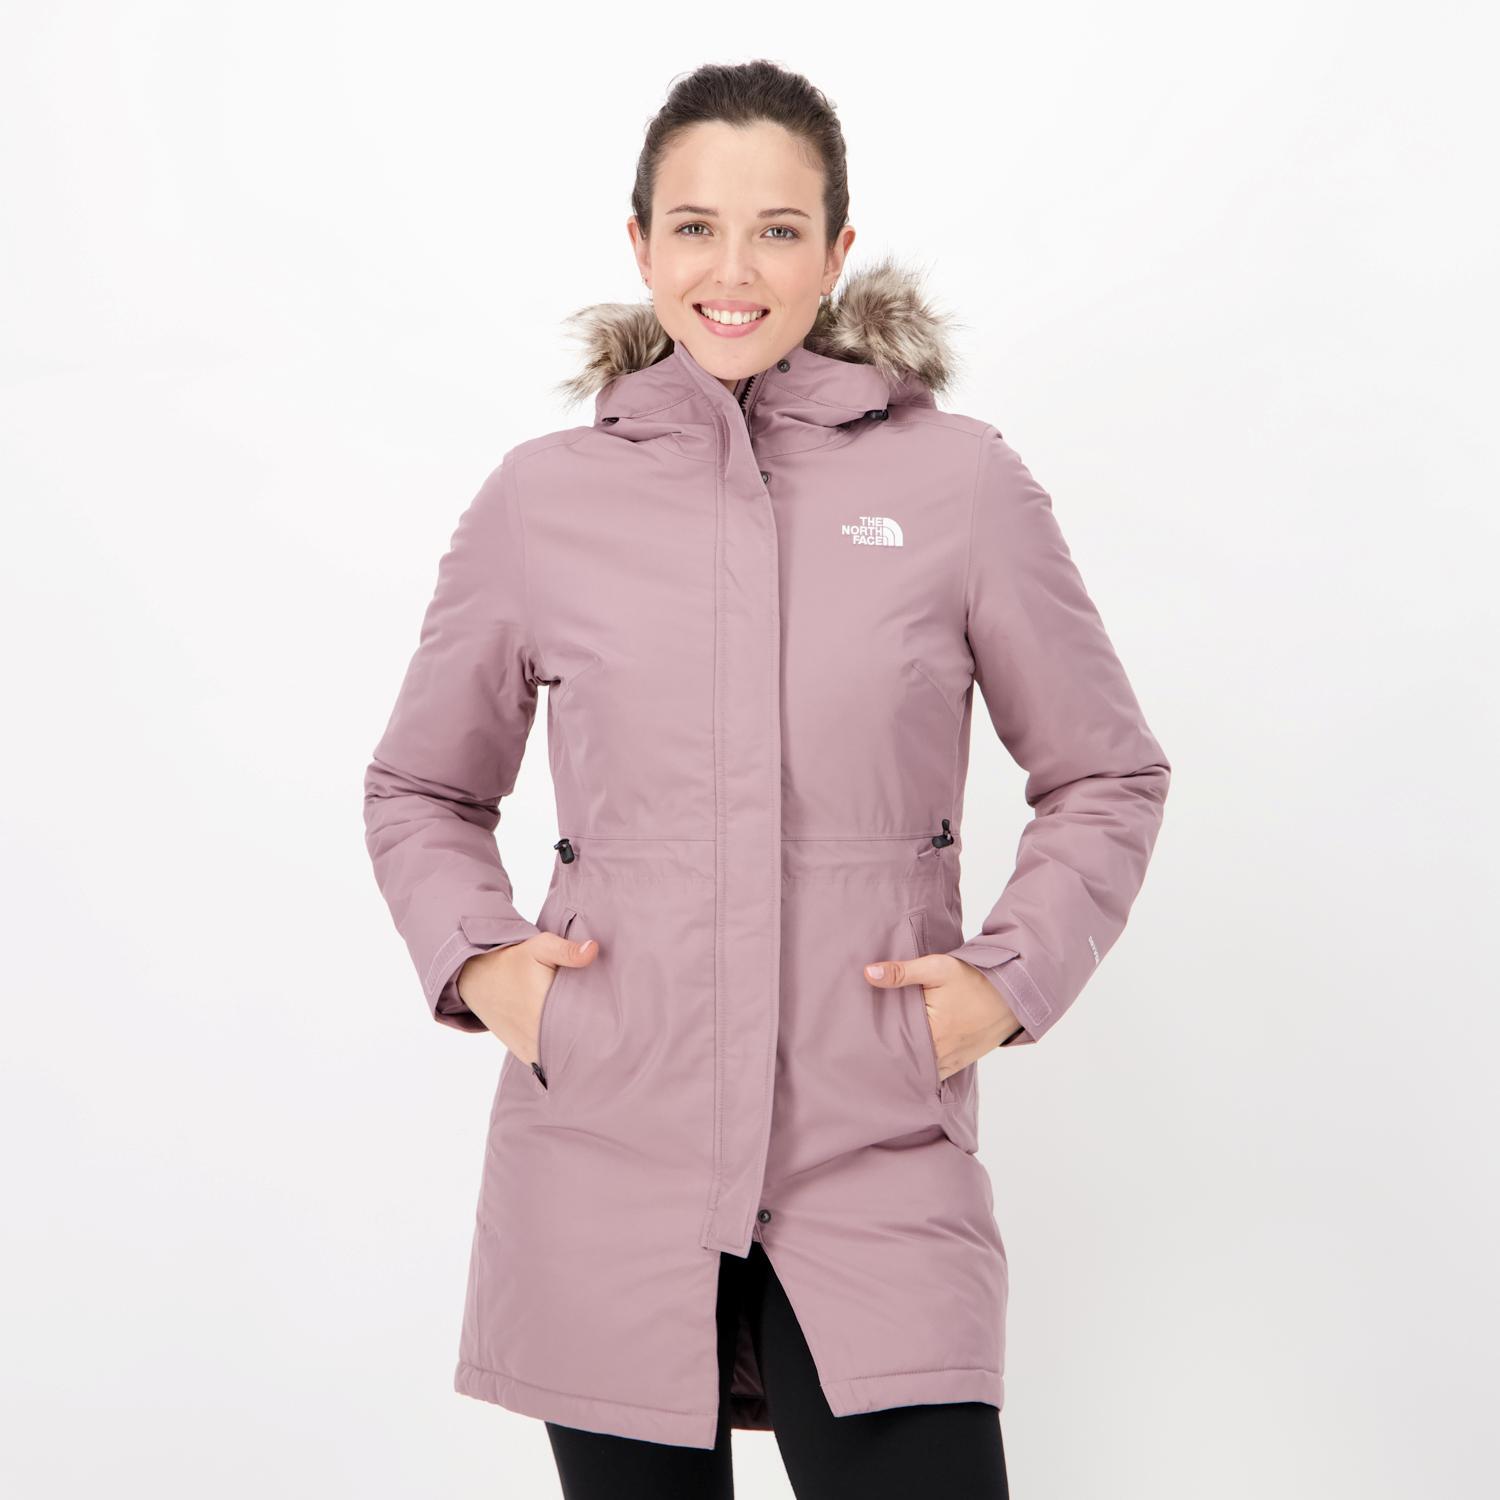 North Face The Zaneck Roze Anorak Jas Dames